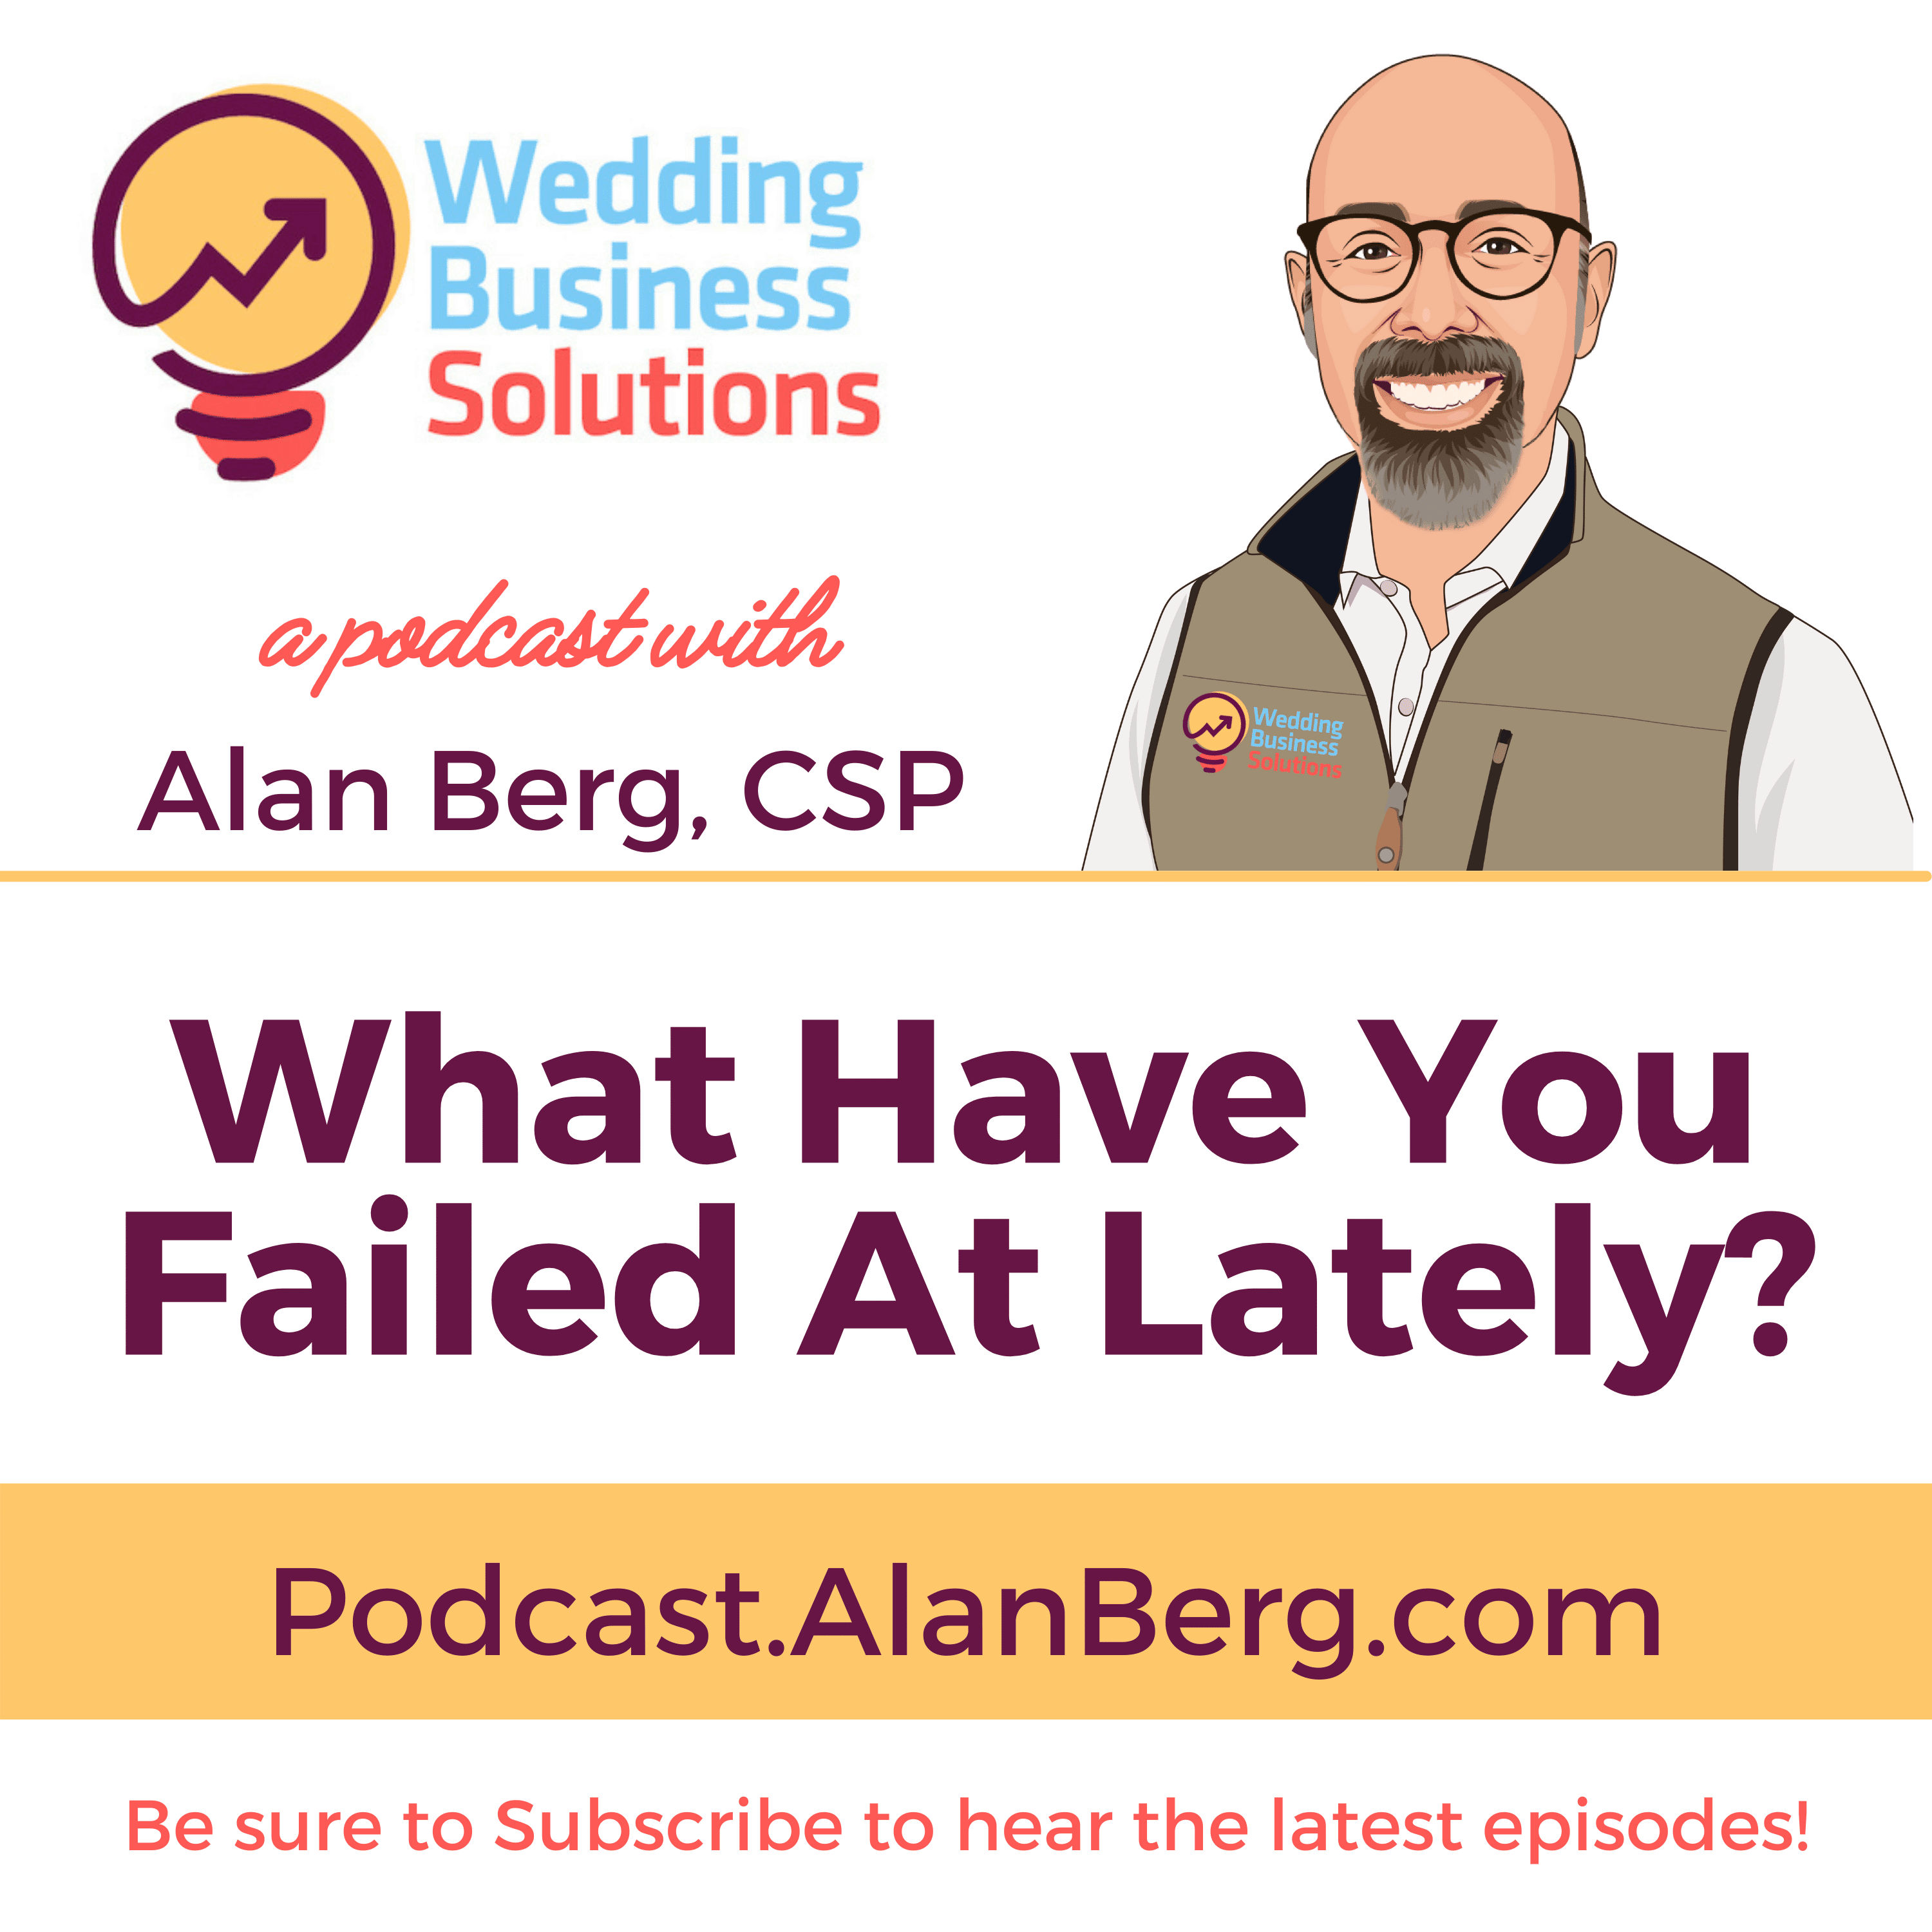 What Have You Failed At Lately? – Podcast Transcript